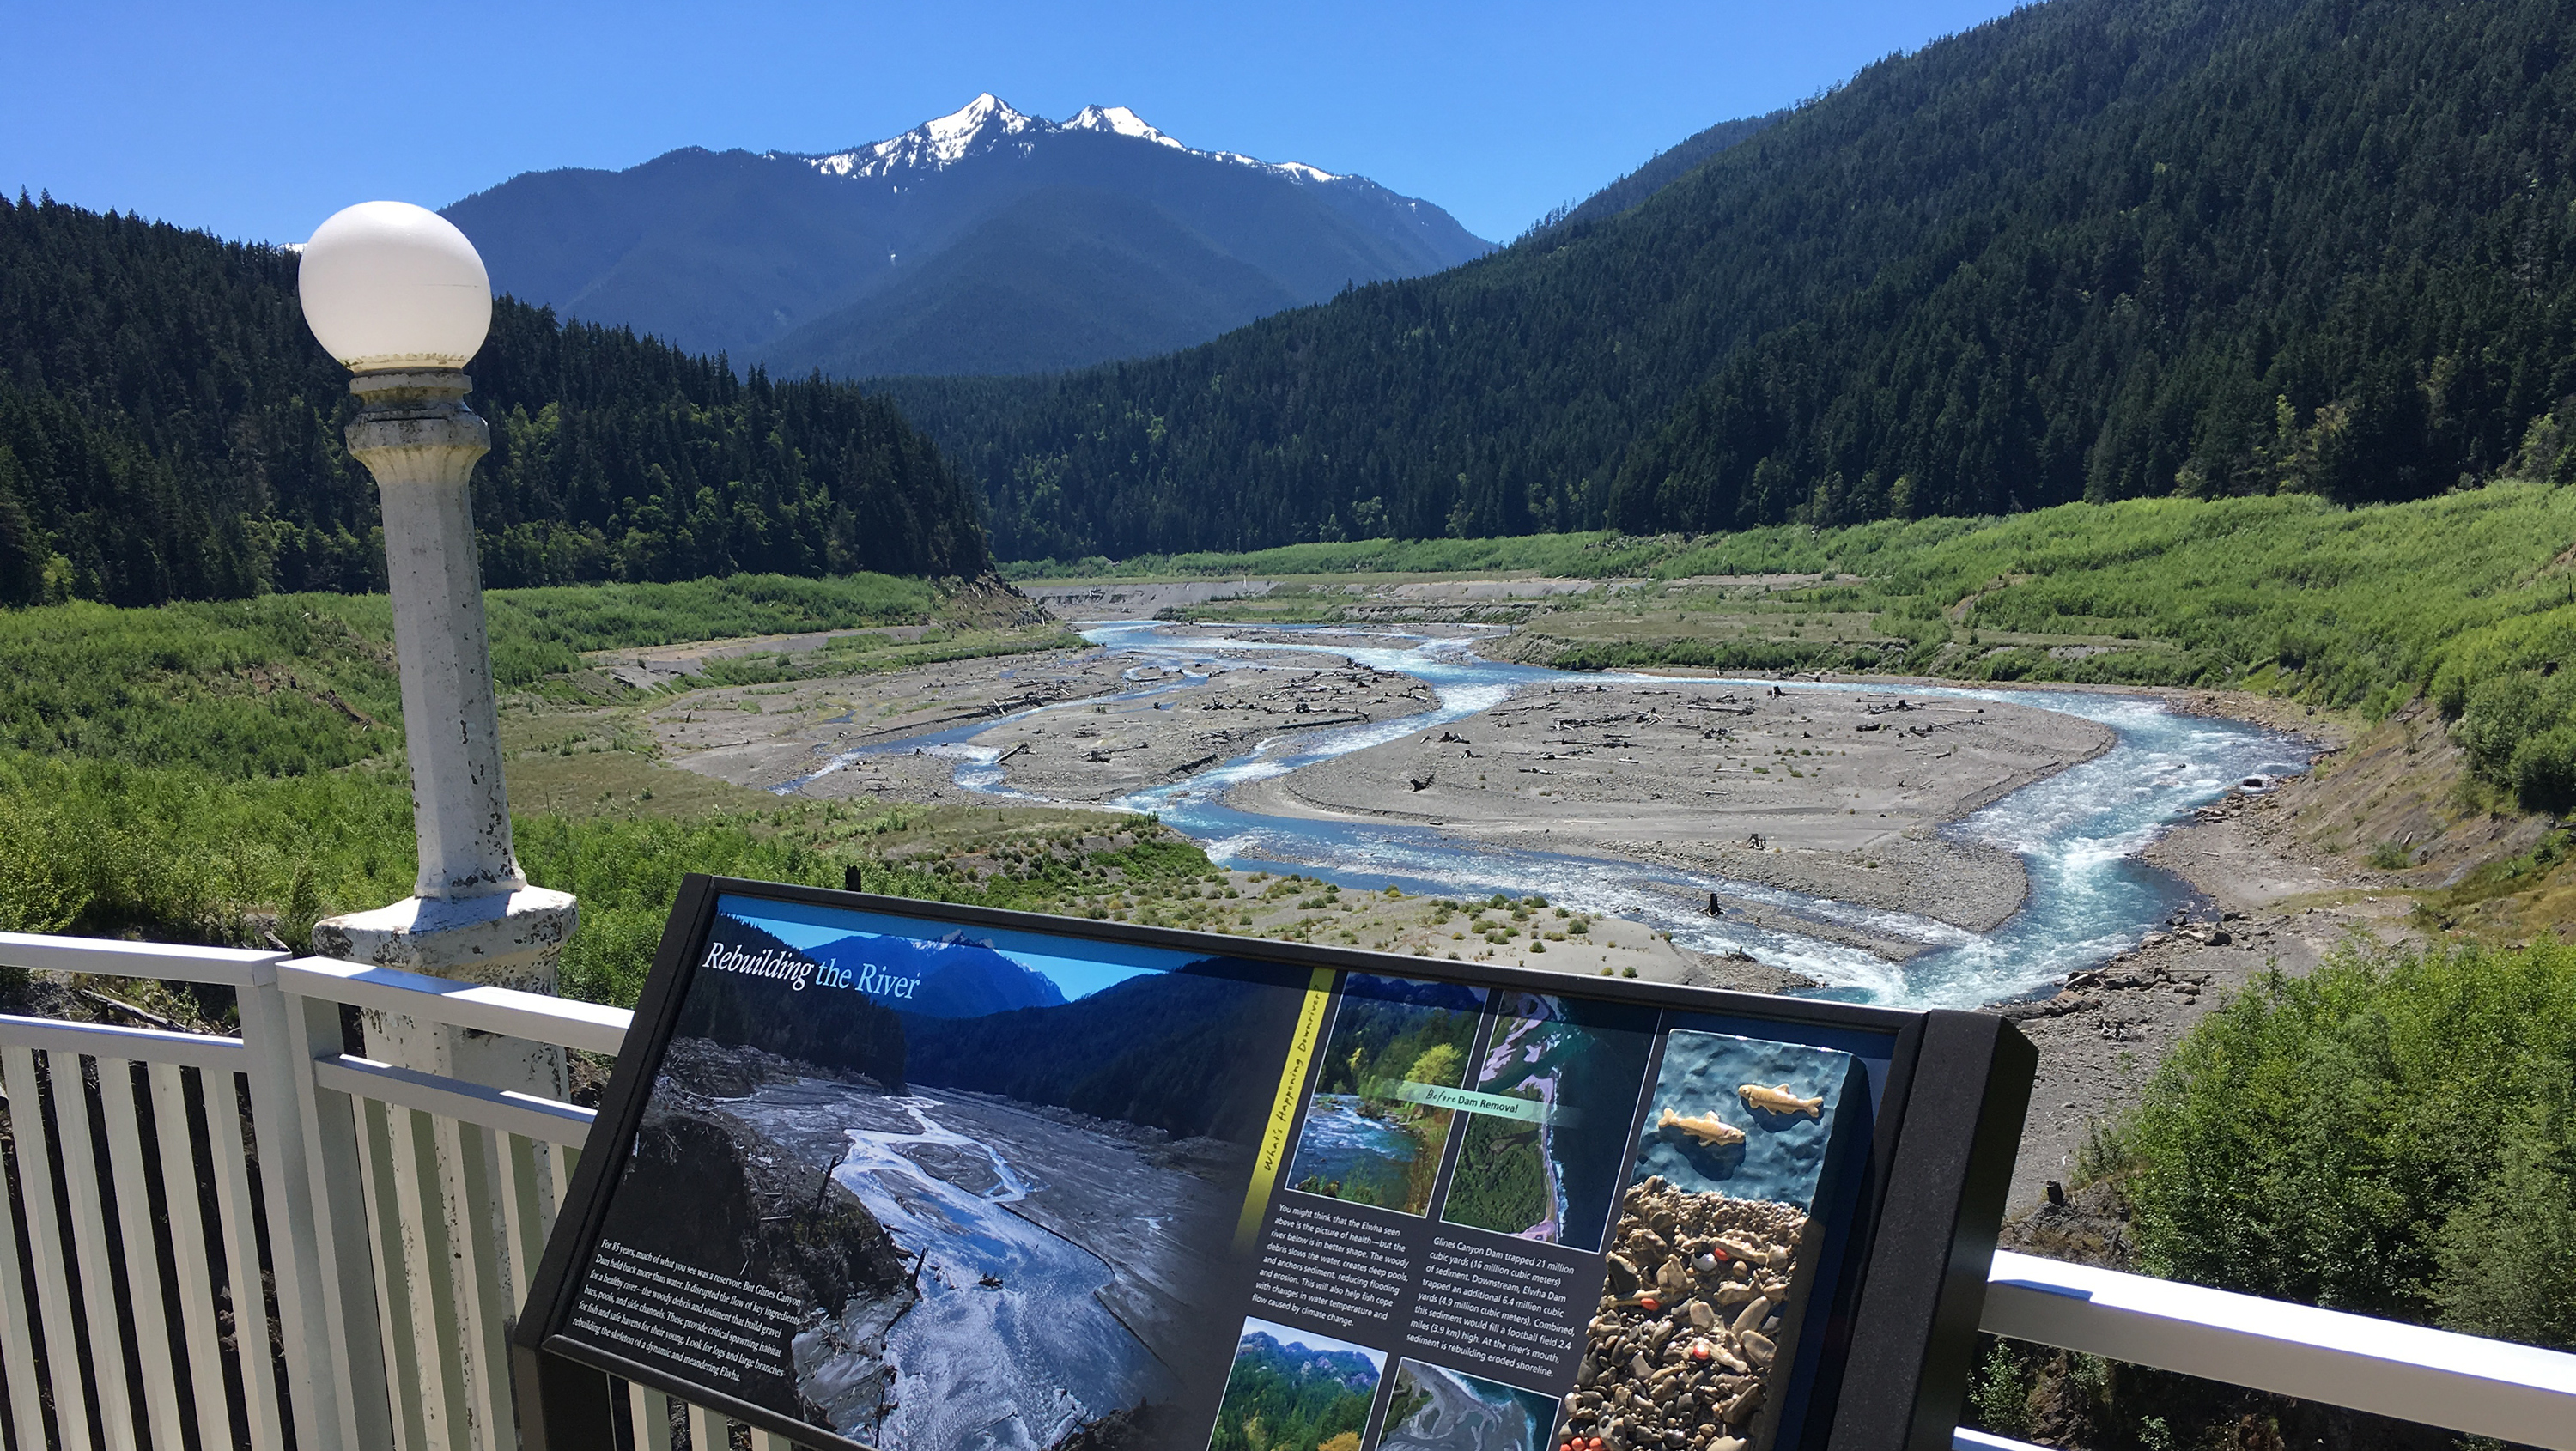 At Elwha River, forests, fish and flowers where there were dams and lakes